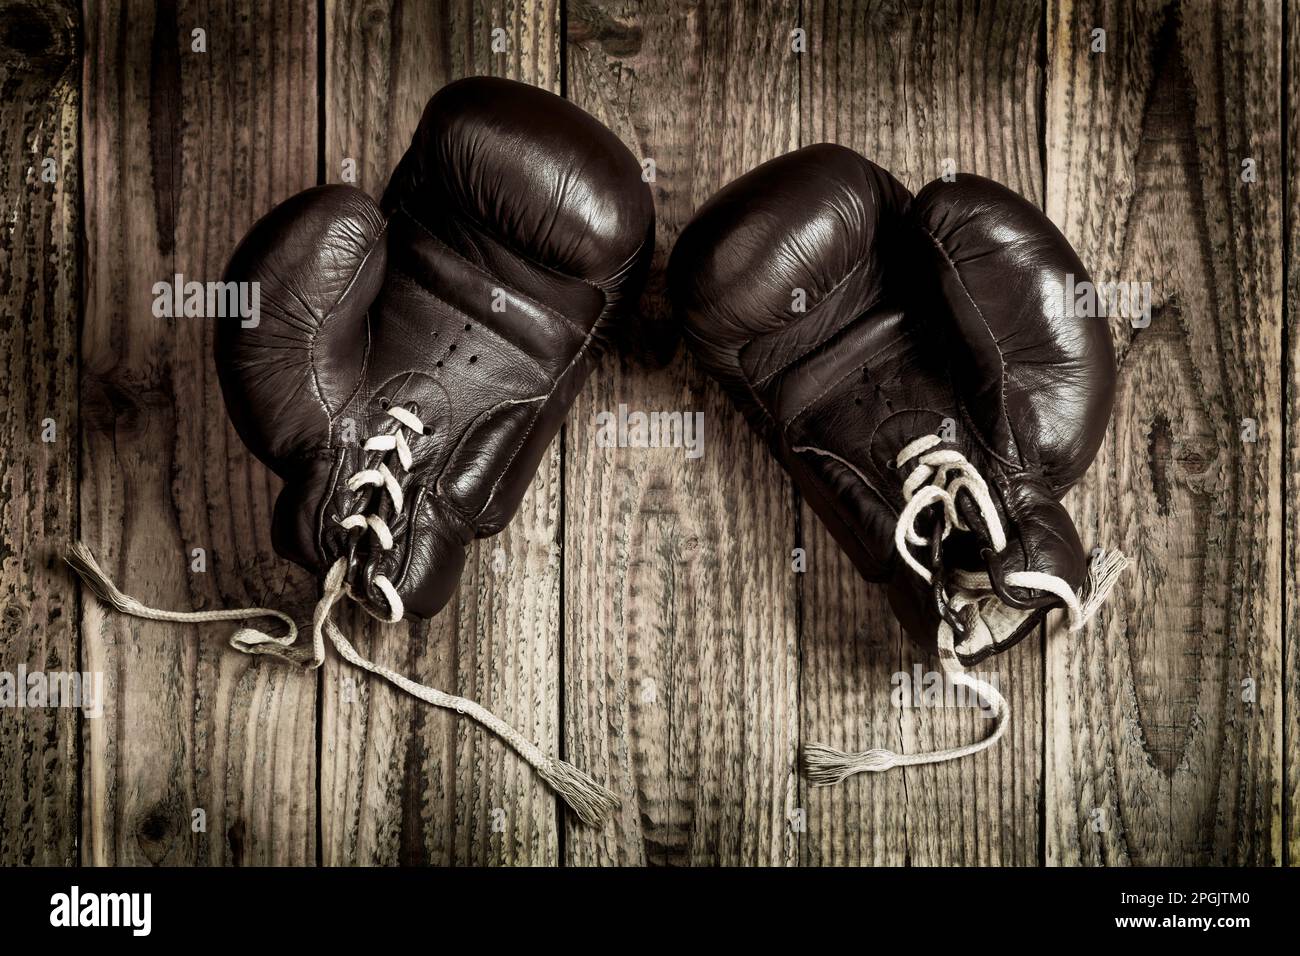 old boxing gloves on wooden background Stock Photo